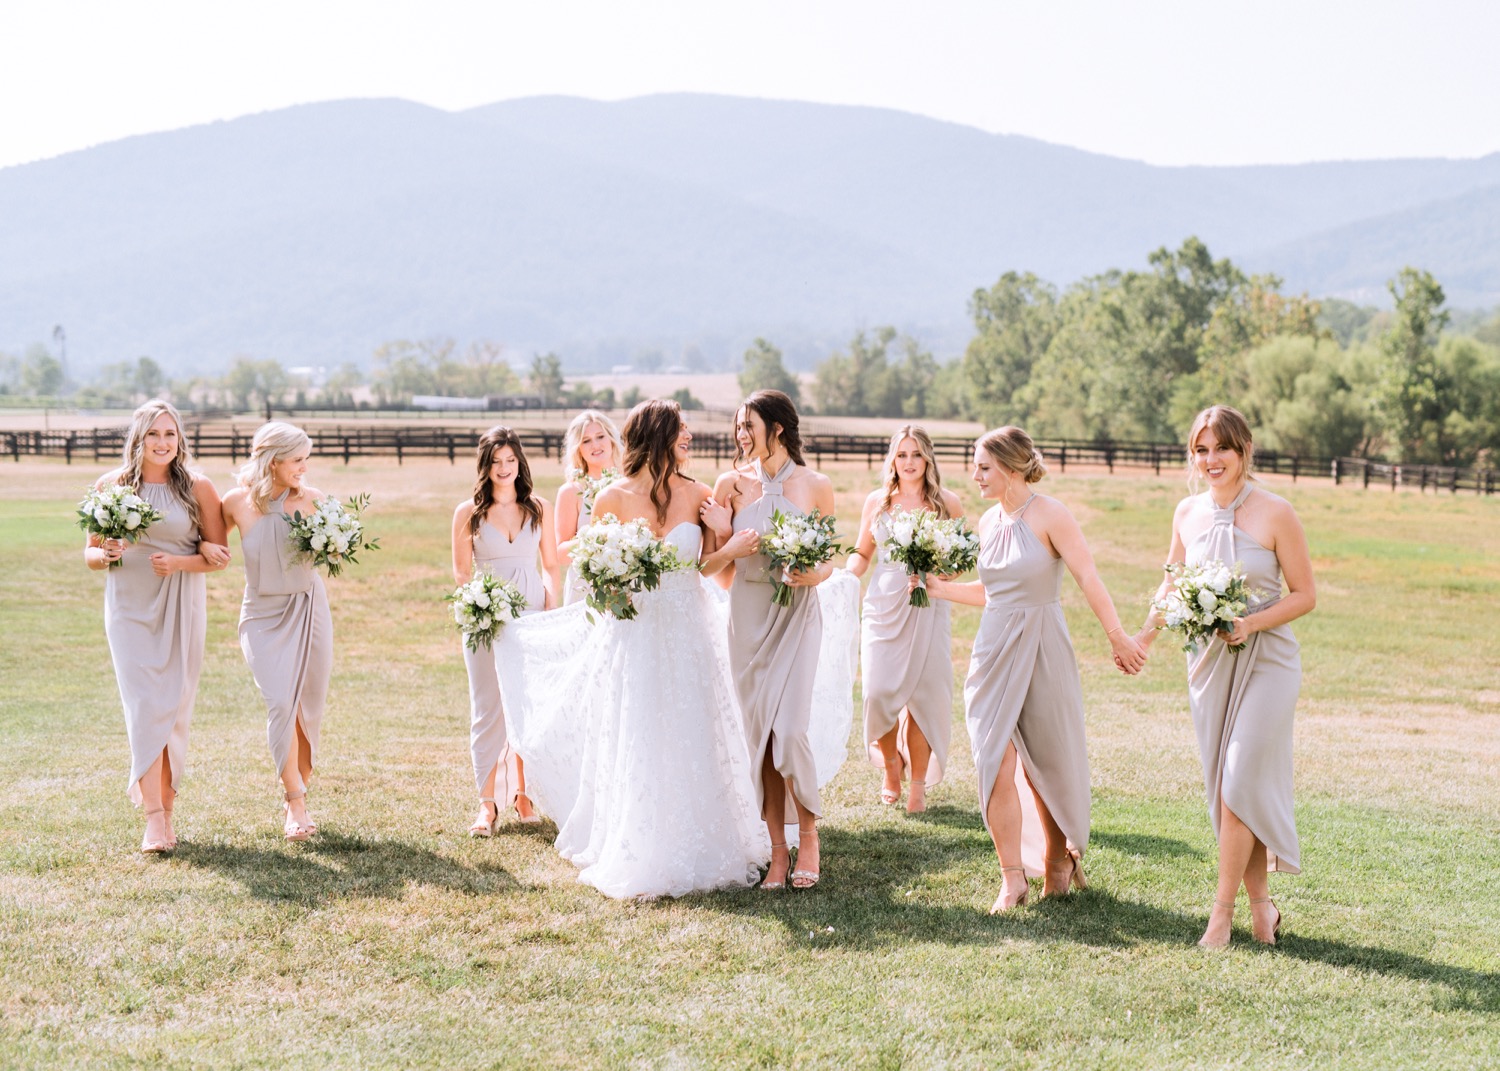 bride and bridesmaids in their taupe colored bridesmaids dresses celebrating the Charlottesville wedding day